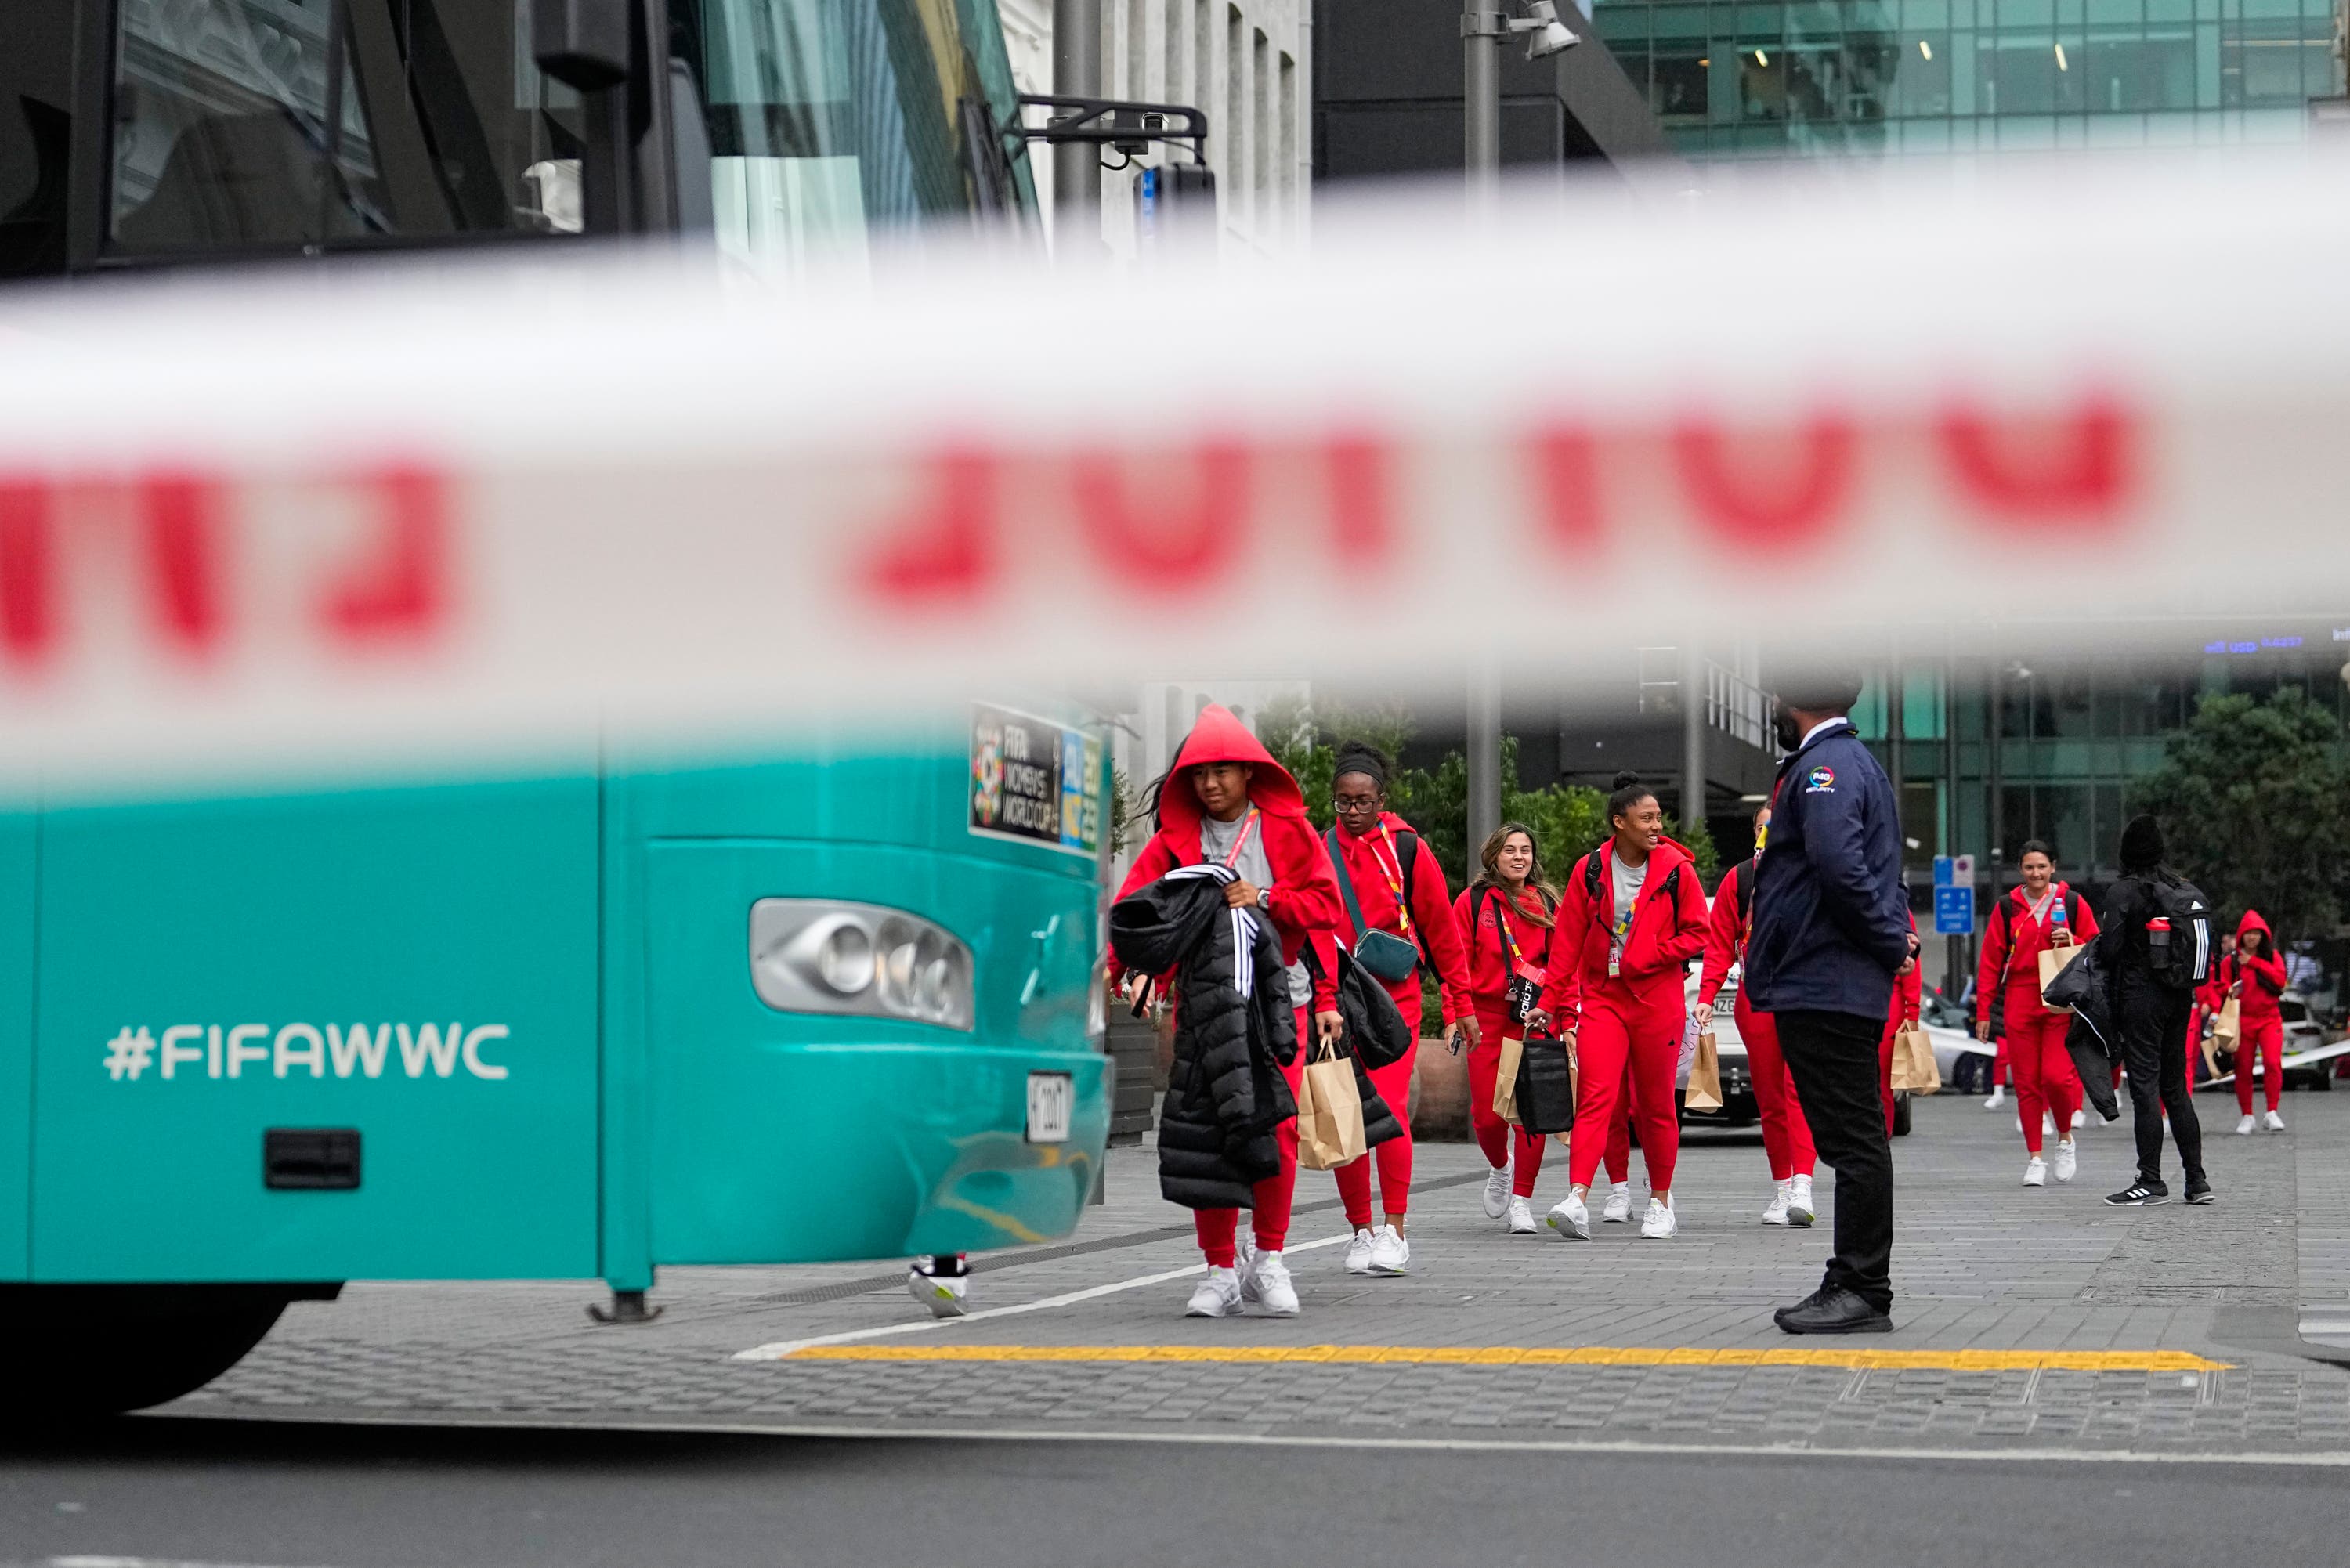 Members of the Philippine Women’s World Cup team walk to their team bus following the shooting near their hotel.